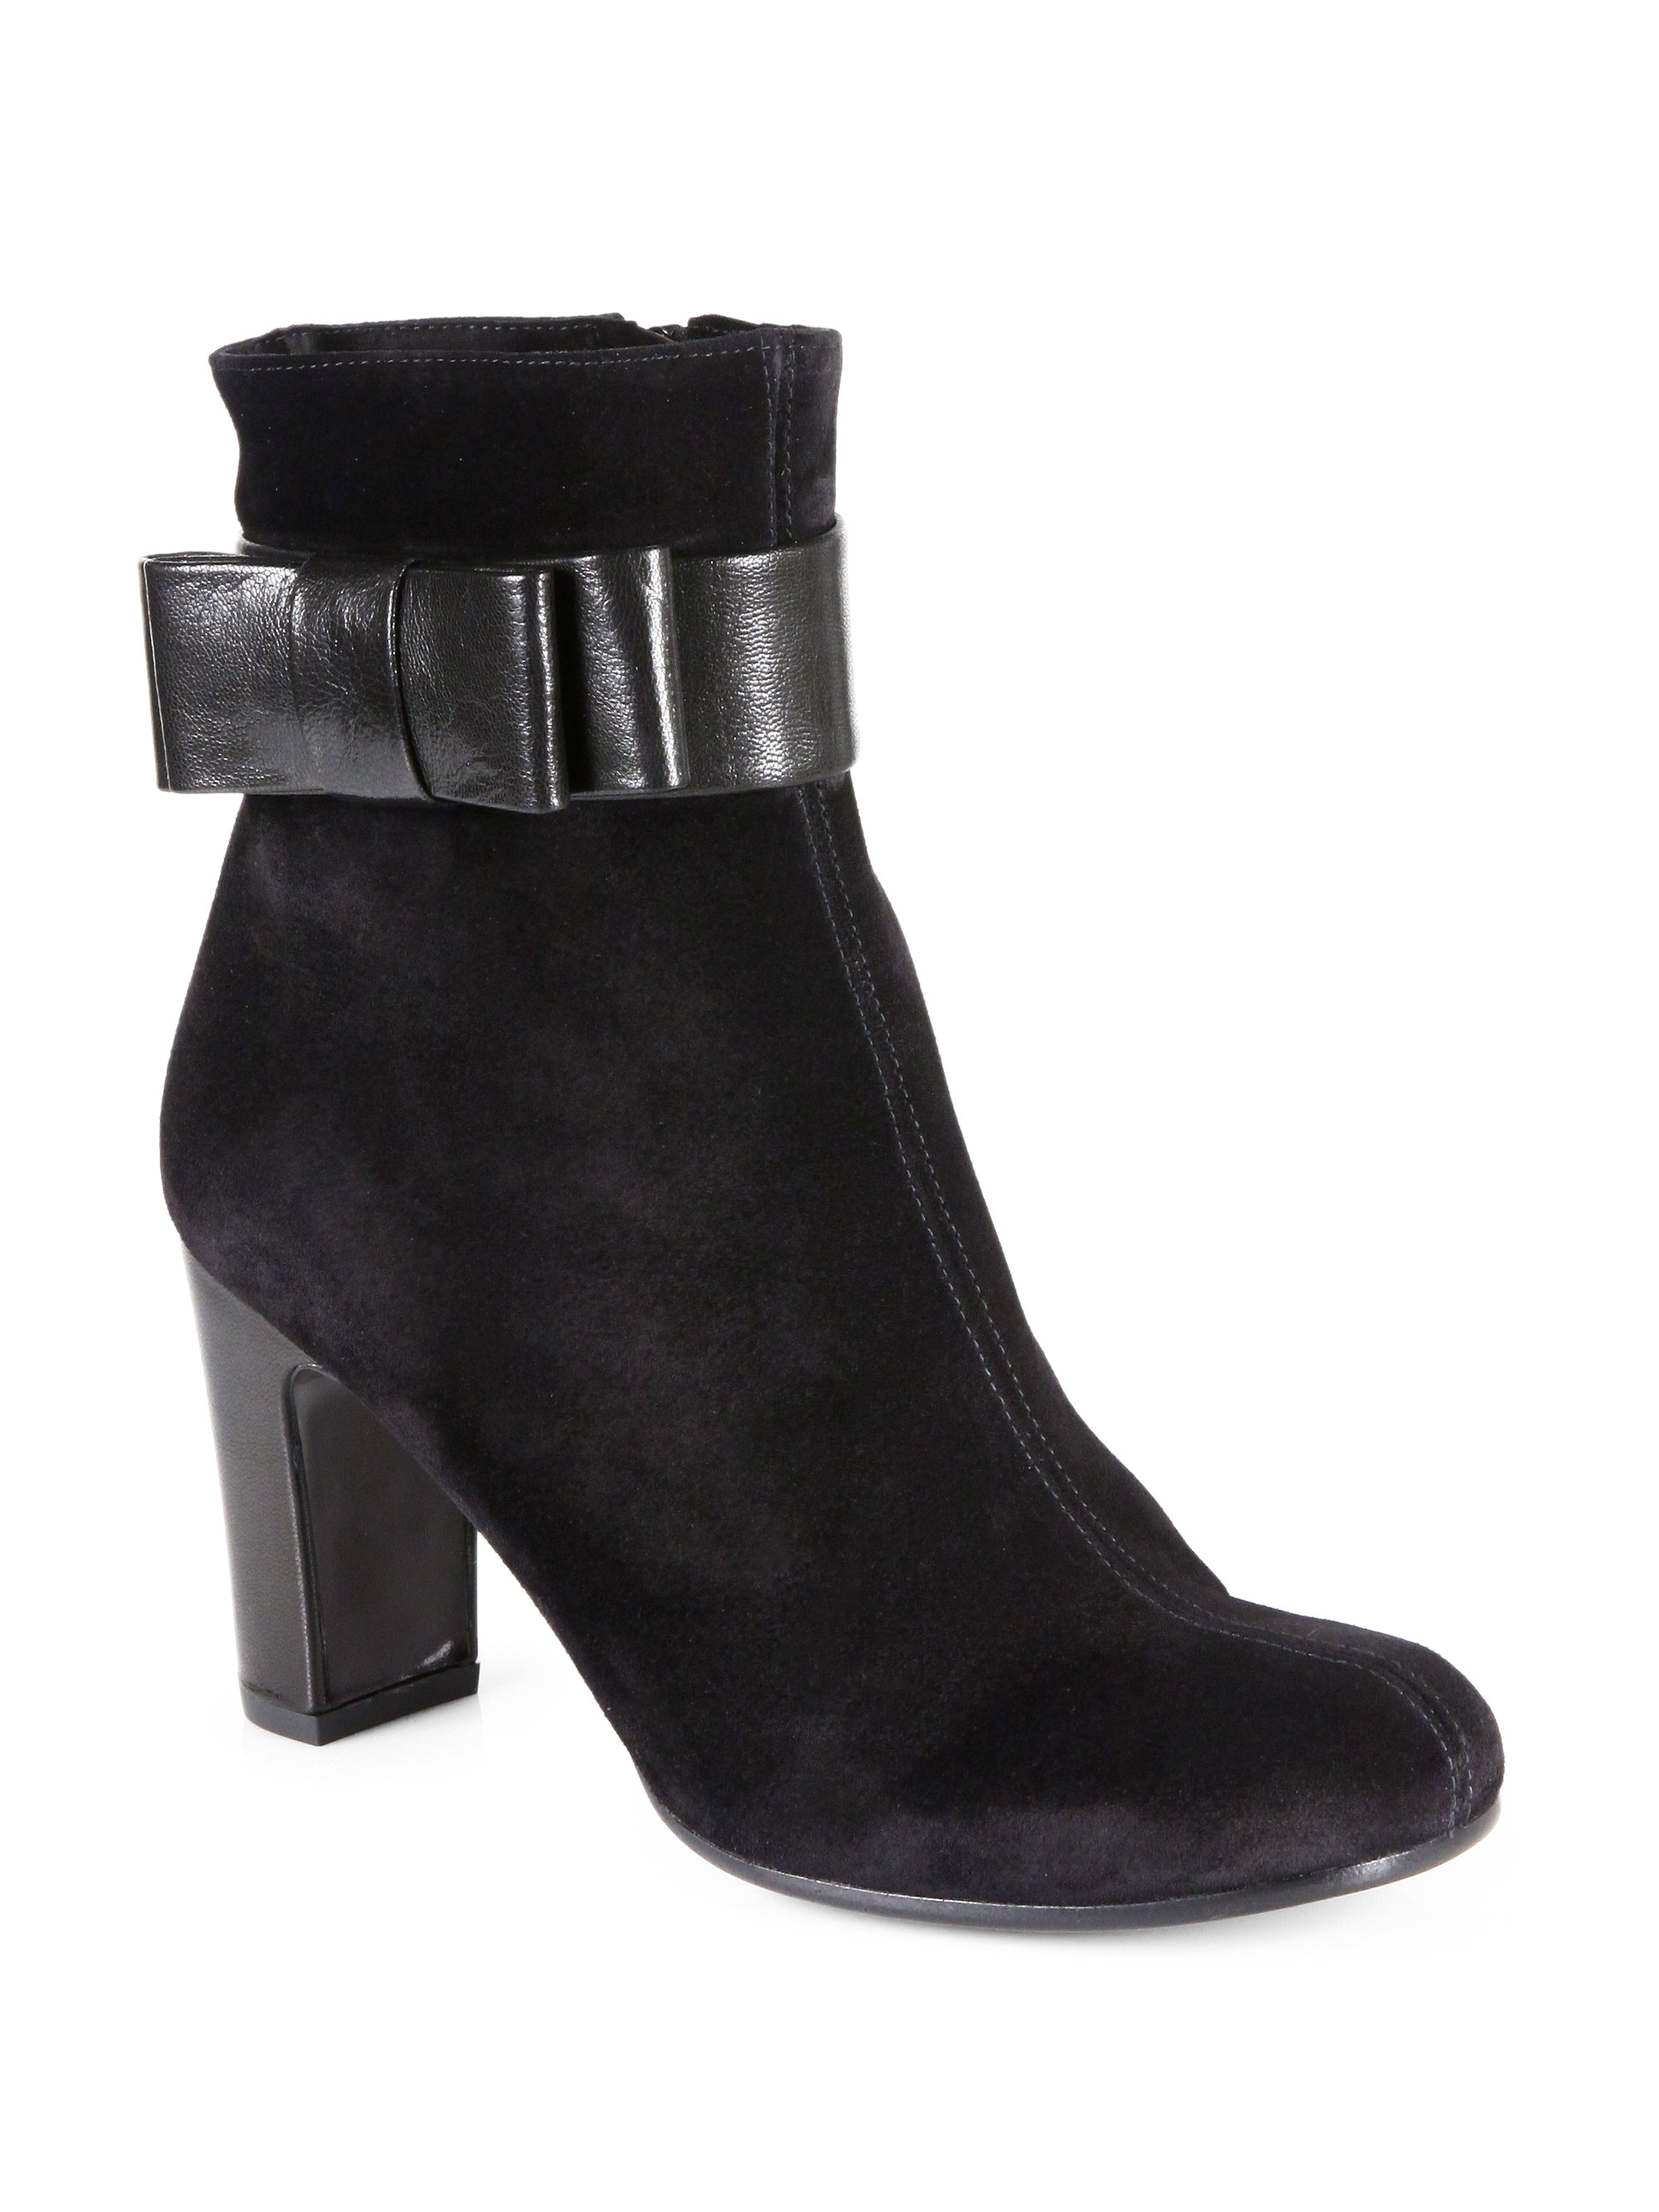 Chie Mihara Friend Suede Leather Ankle Boots in Black | Lyst